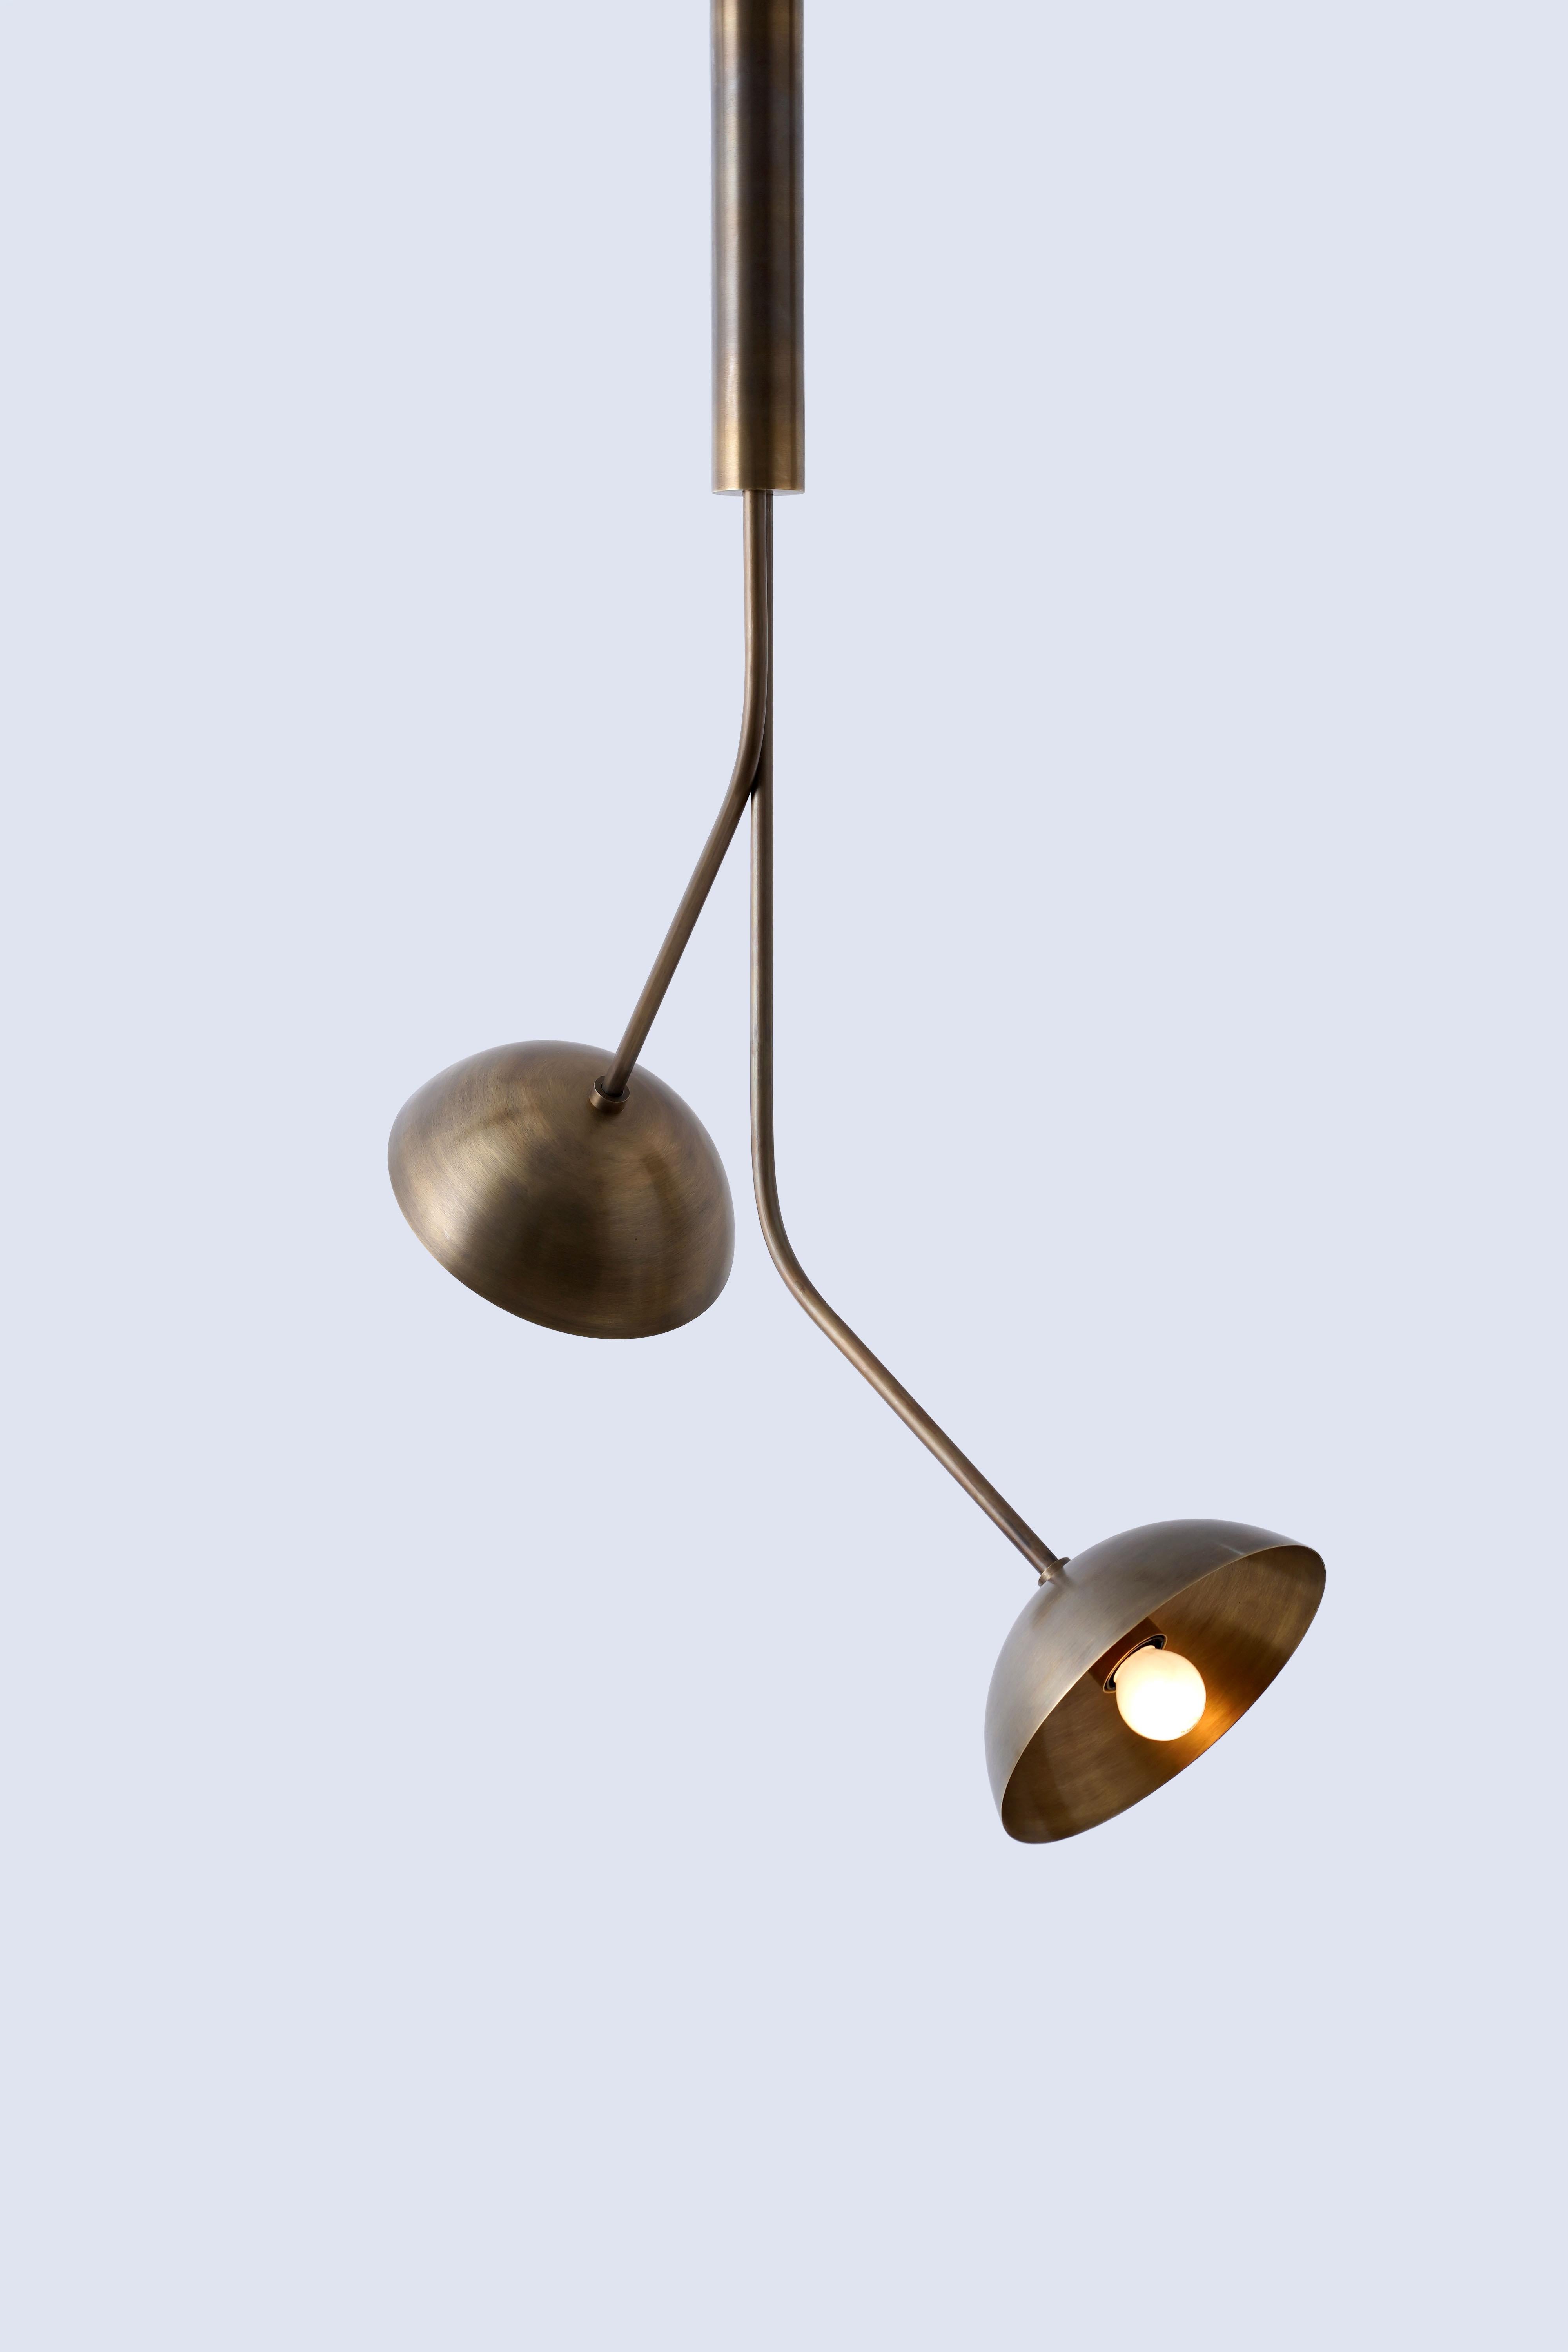 Rhythm 2 Brass Dome Pendant Lamp by Lamp Shaper
Dimensions: D 66 x W 66 x H 109 cm.
Materials: Brass.

Different finishes available: raw brass, aged brass, burnt brass and brushed brass Please contact us.

All our lamps can be wired according to